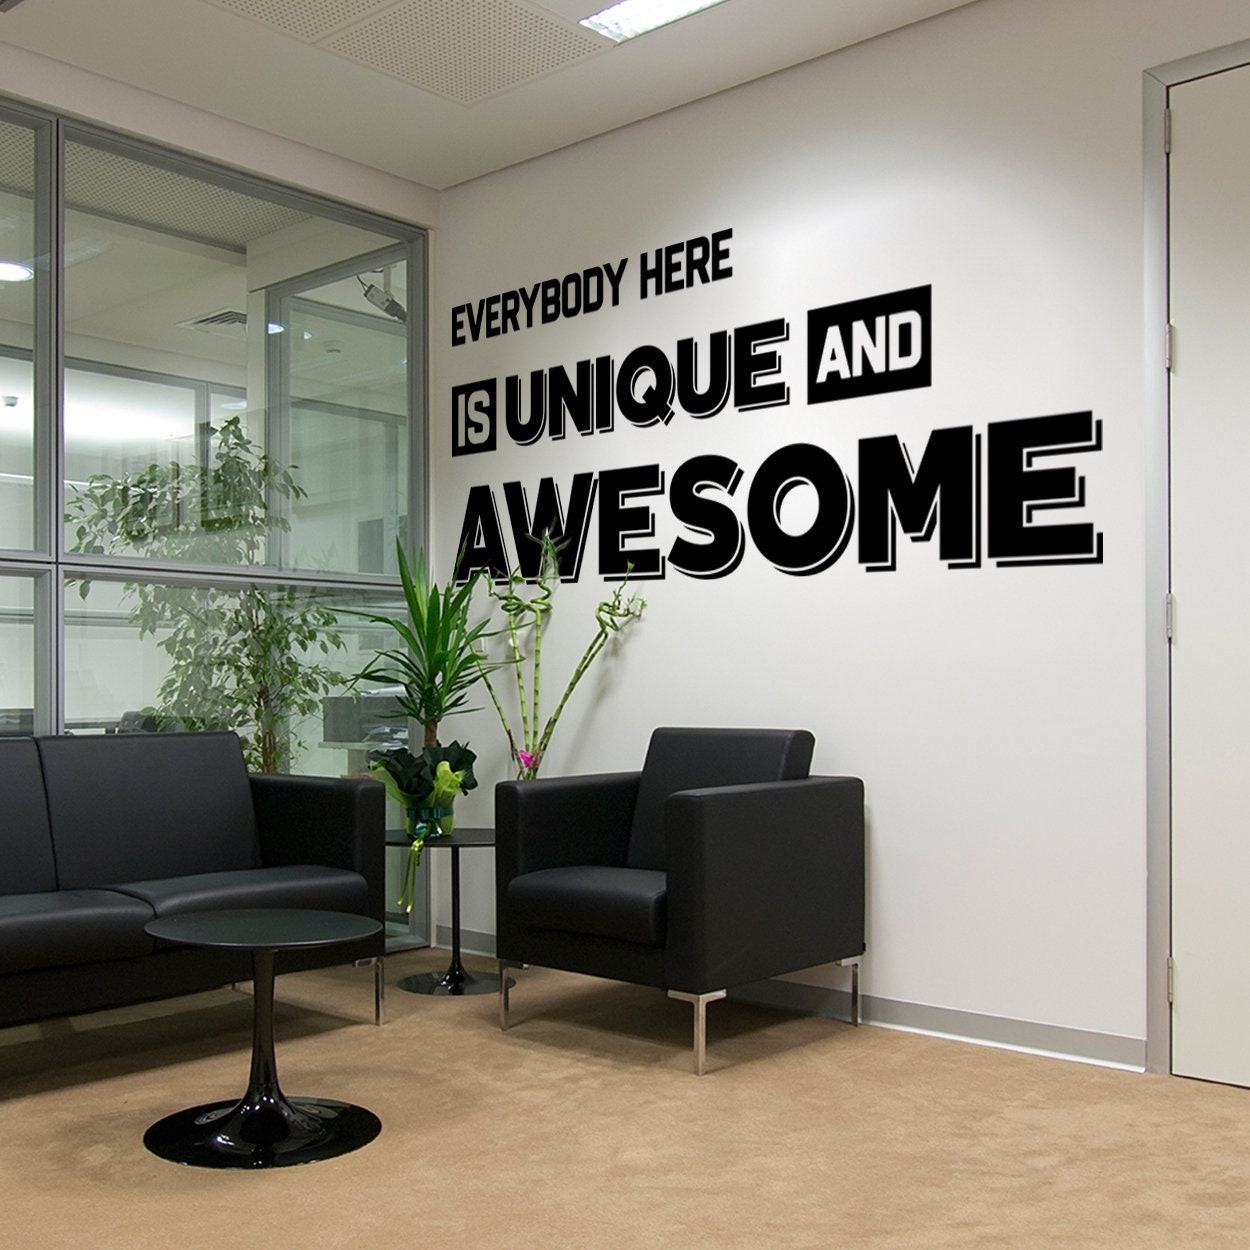 Office Wall Art, Unique, Awesome, Team, Inspiring, Office, Motivational, Office  Decor, Office Wall Decal, Office Wall Decor, Office Decals 